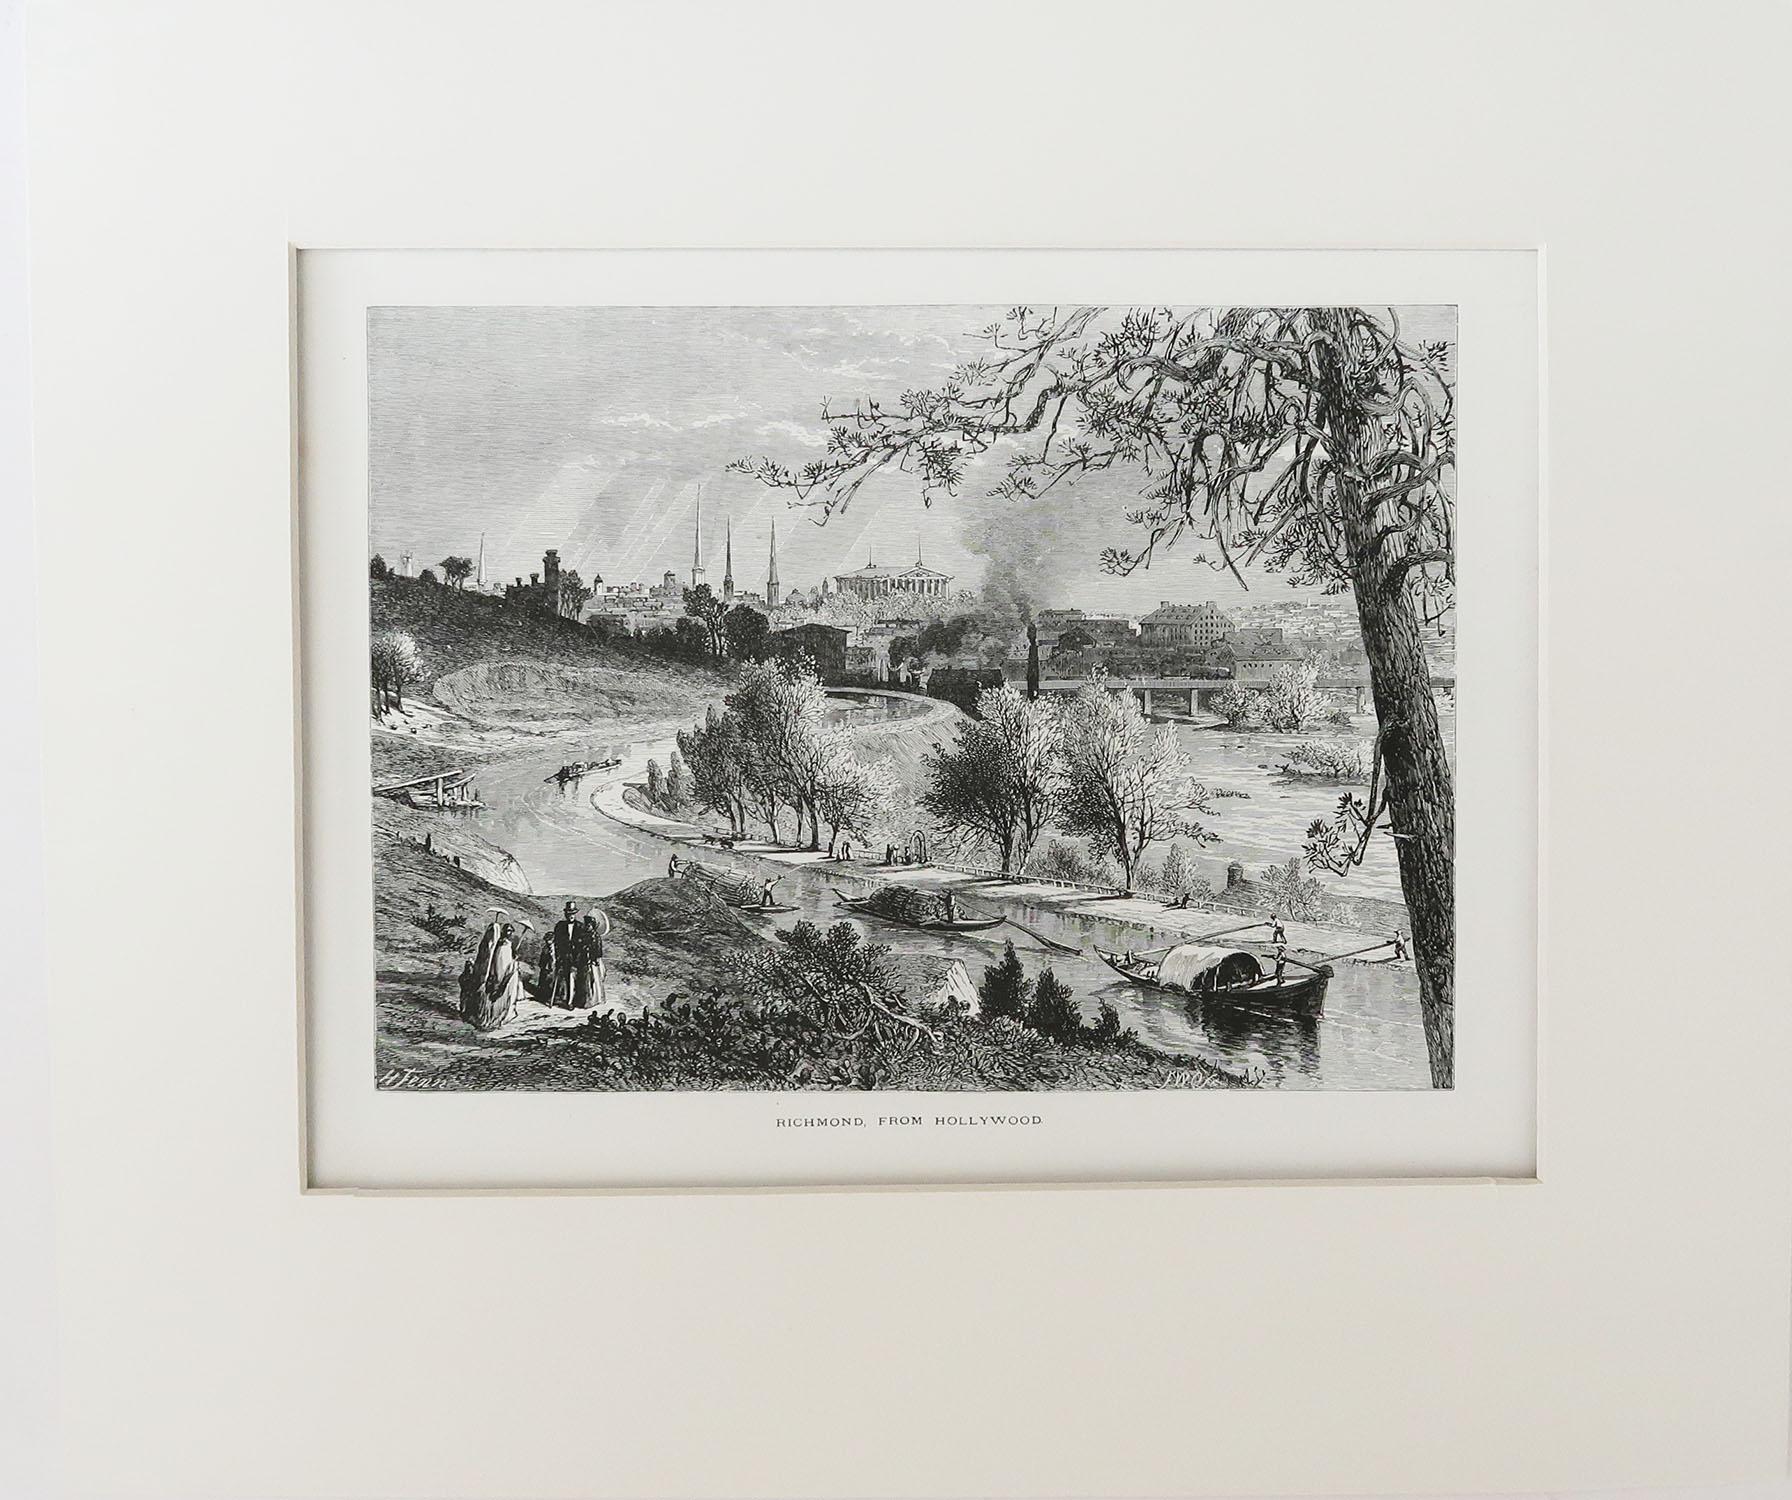 Great print of Richmond

Wood-cut engraving after the drawing by Harry Fenn

Published circa 1870

Matted or mounted in cream card

Unframed

The measurement below is the size of the card.
 